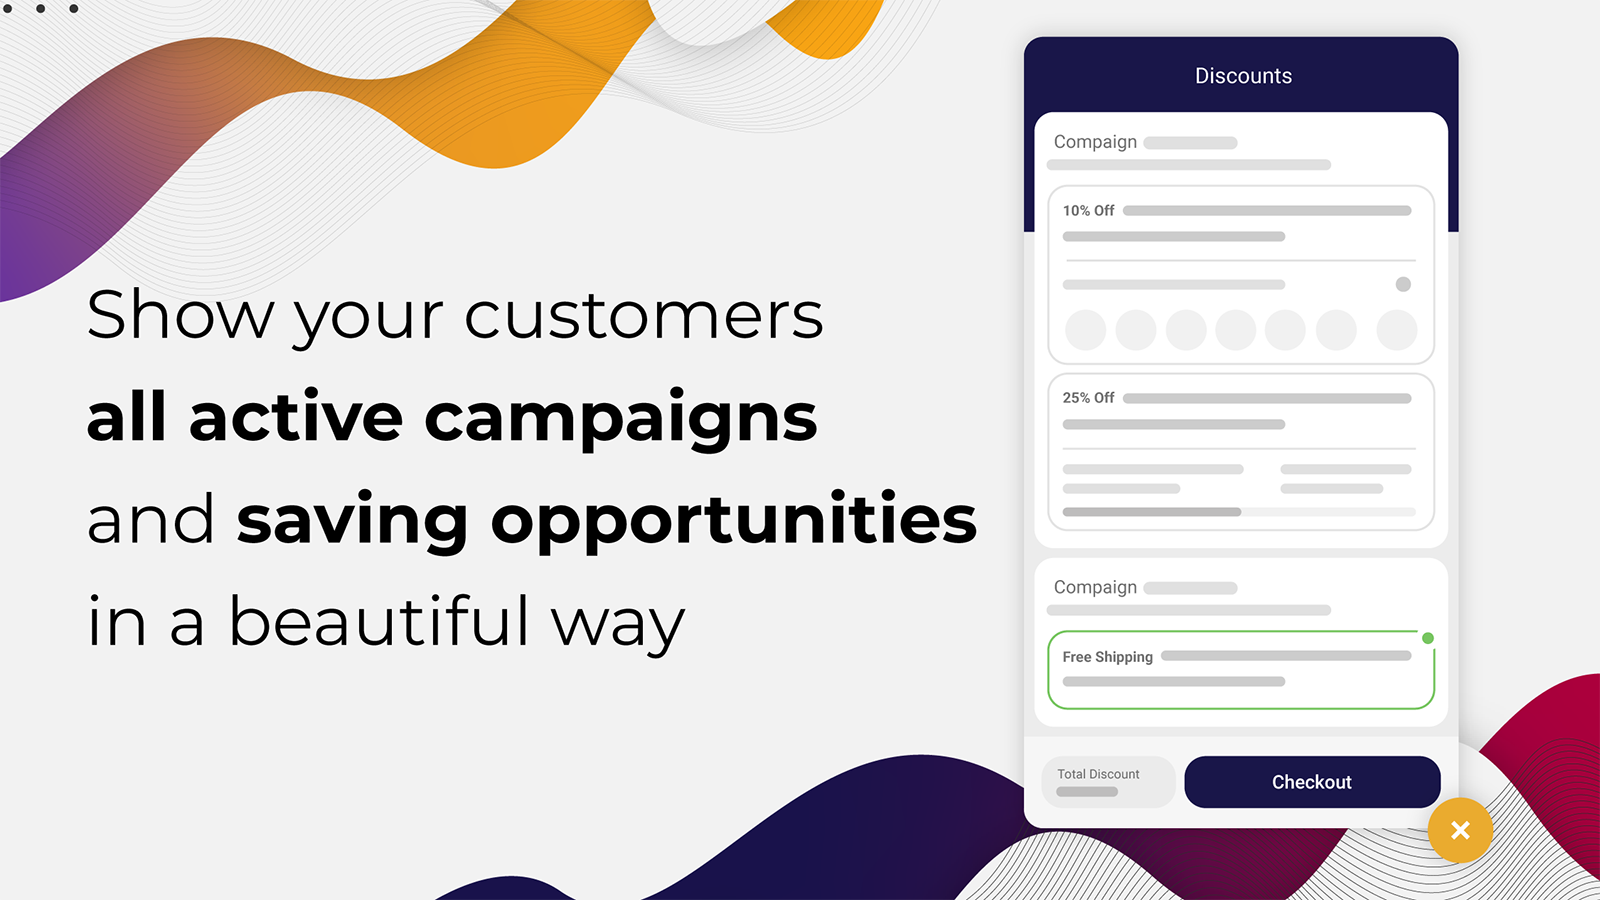 Show your customers all active campaigns